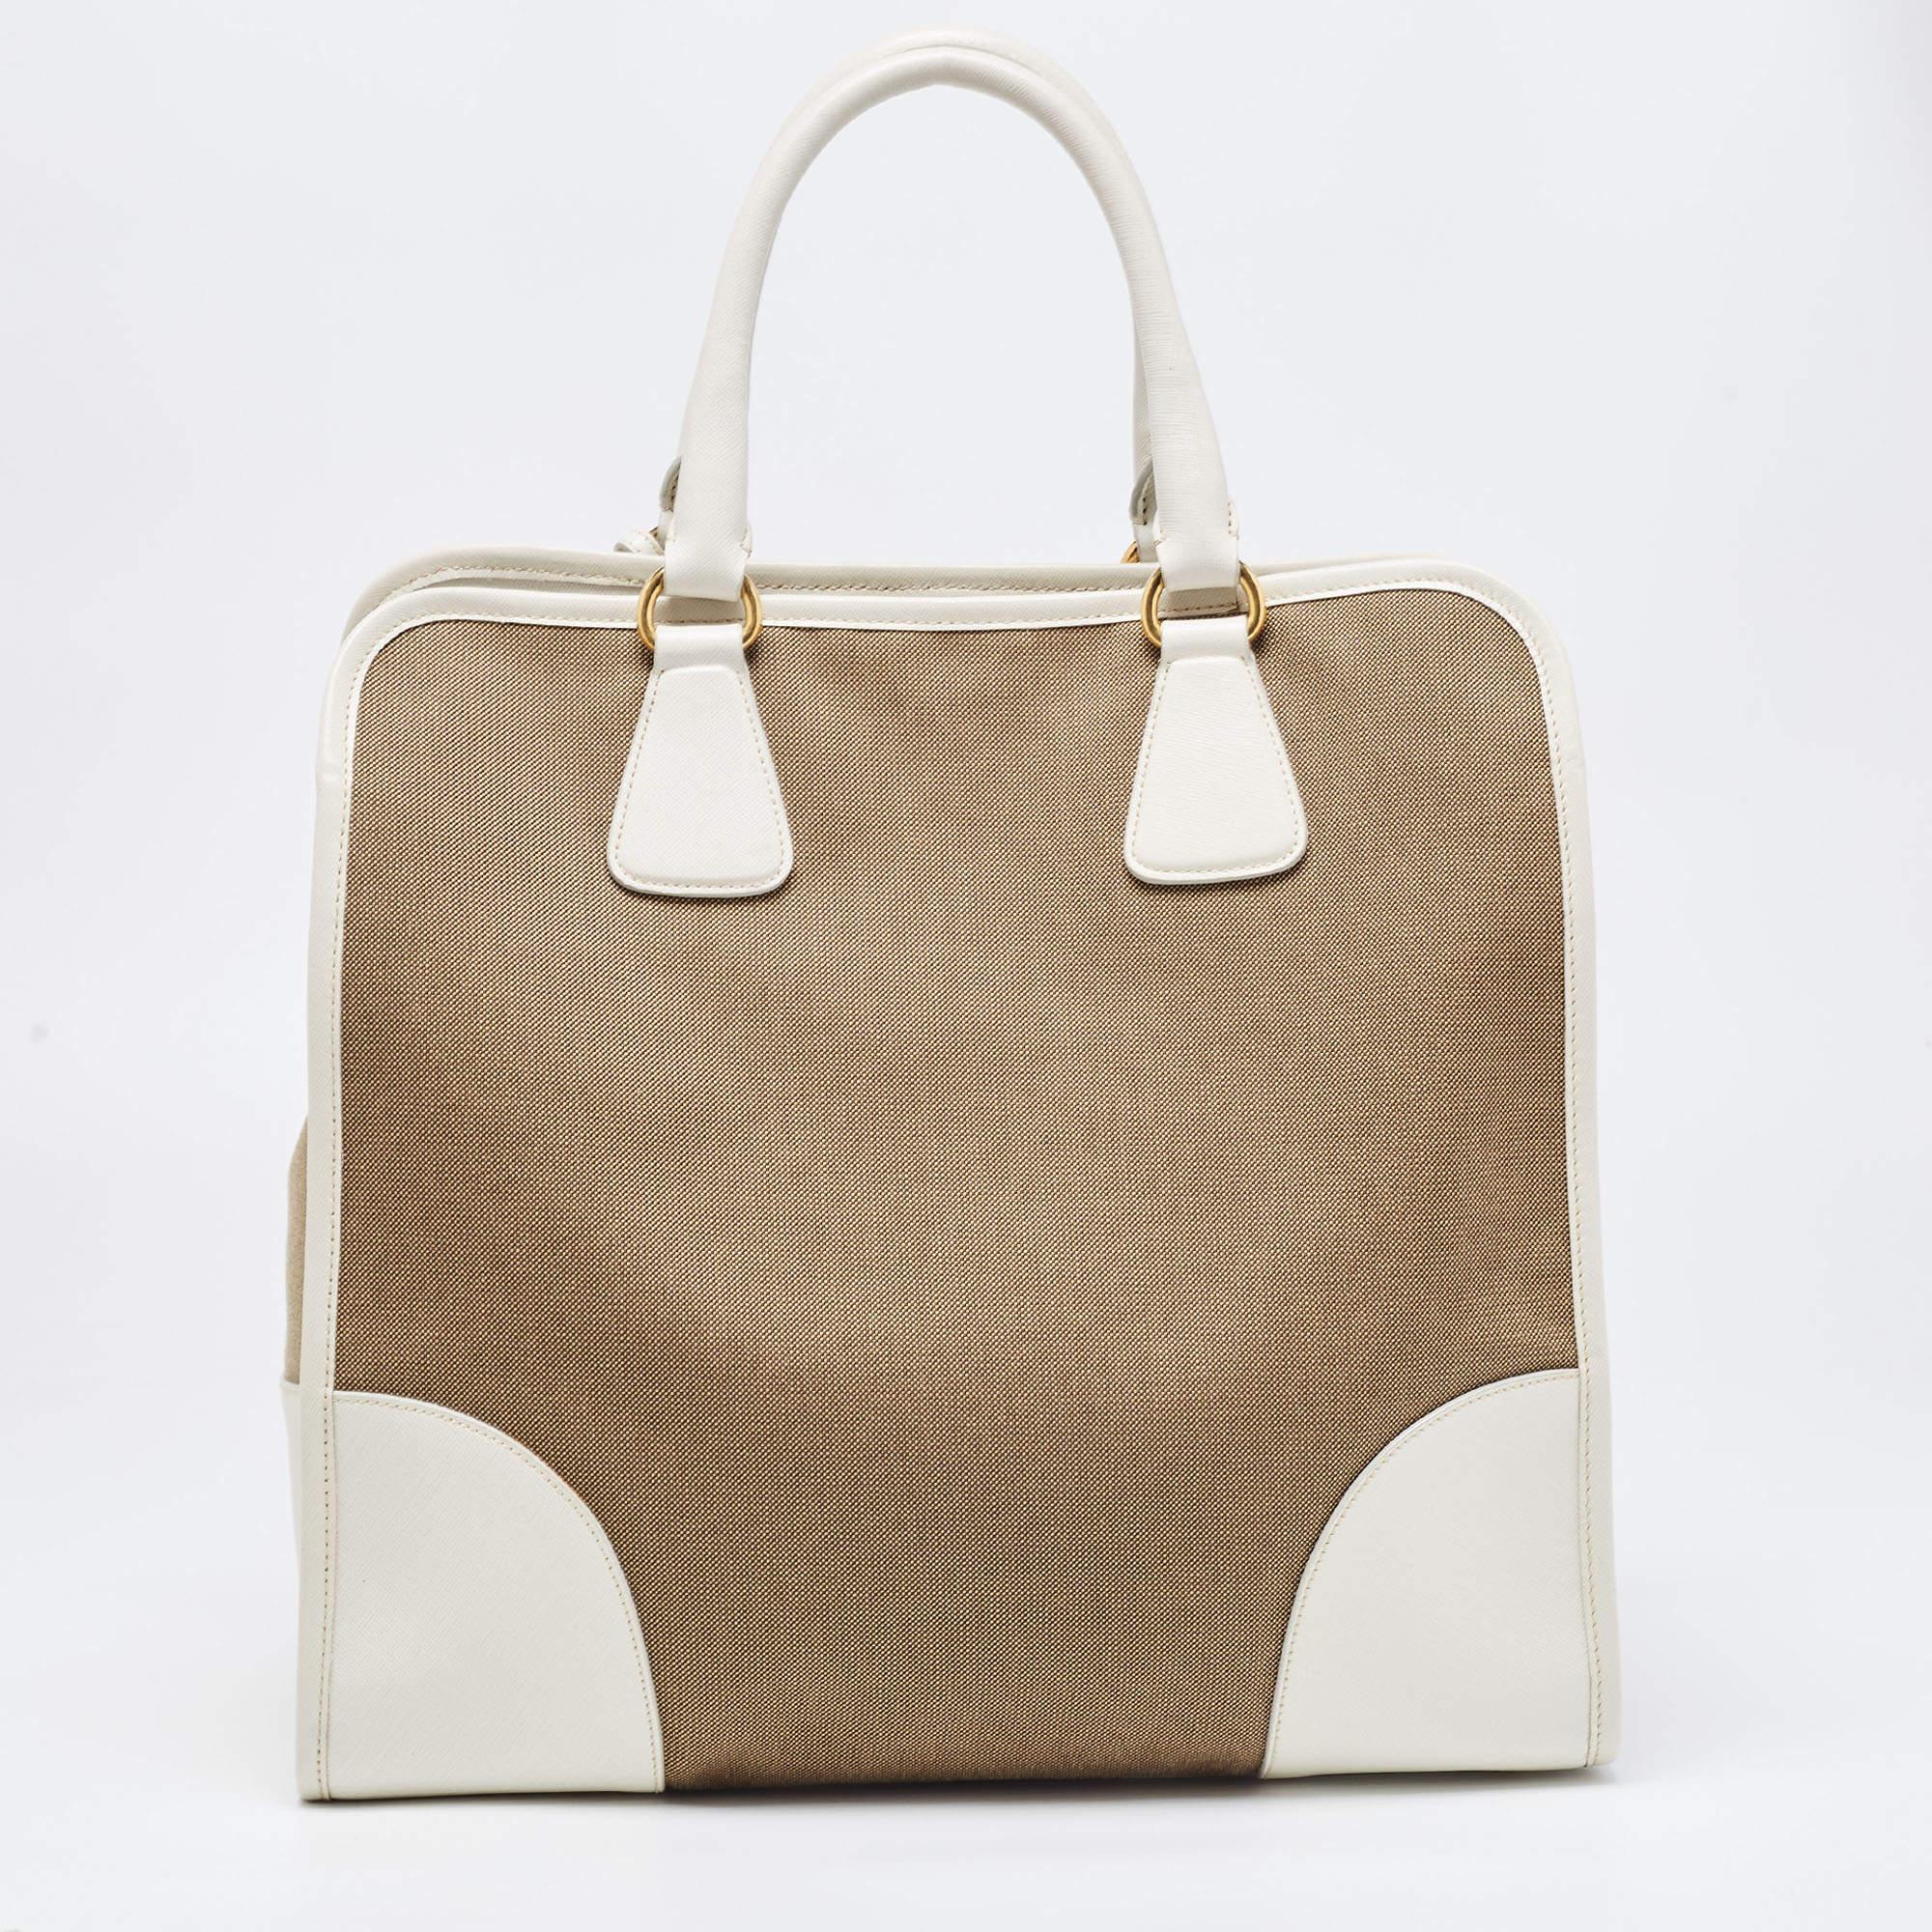 The simple silhouette and the use of durable materials for the exterior bring out the appeal of this designer tote for women. It features comfortable handles and a well-lined interior.

Includes: Original Dustbag, Detachable Strap

